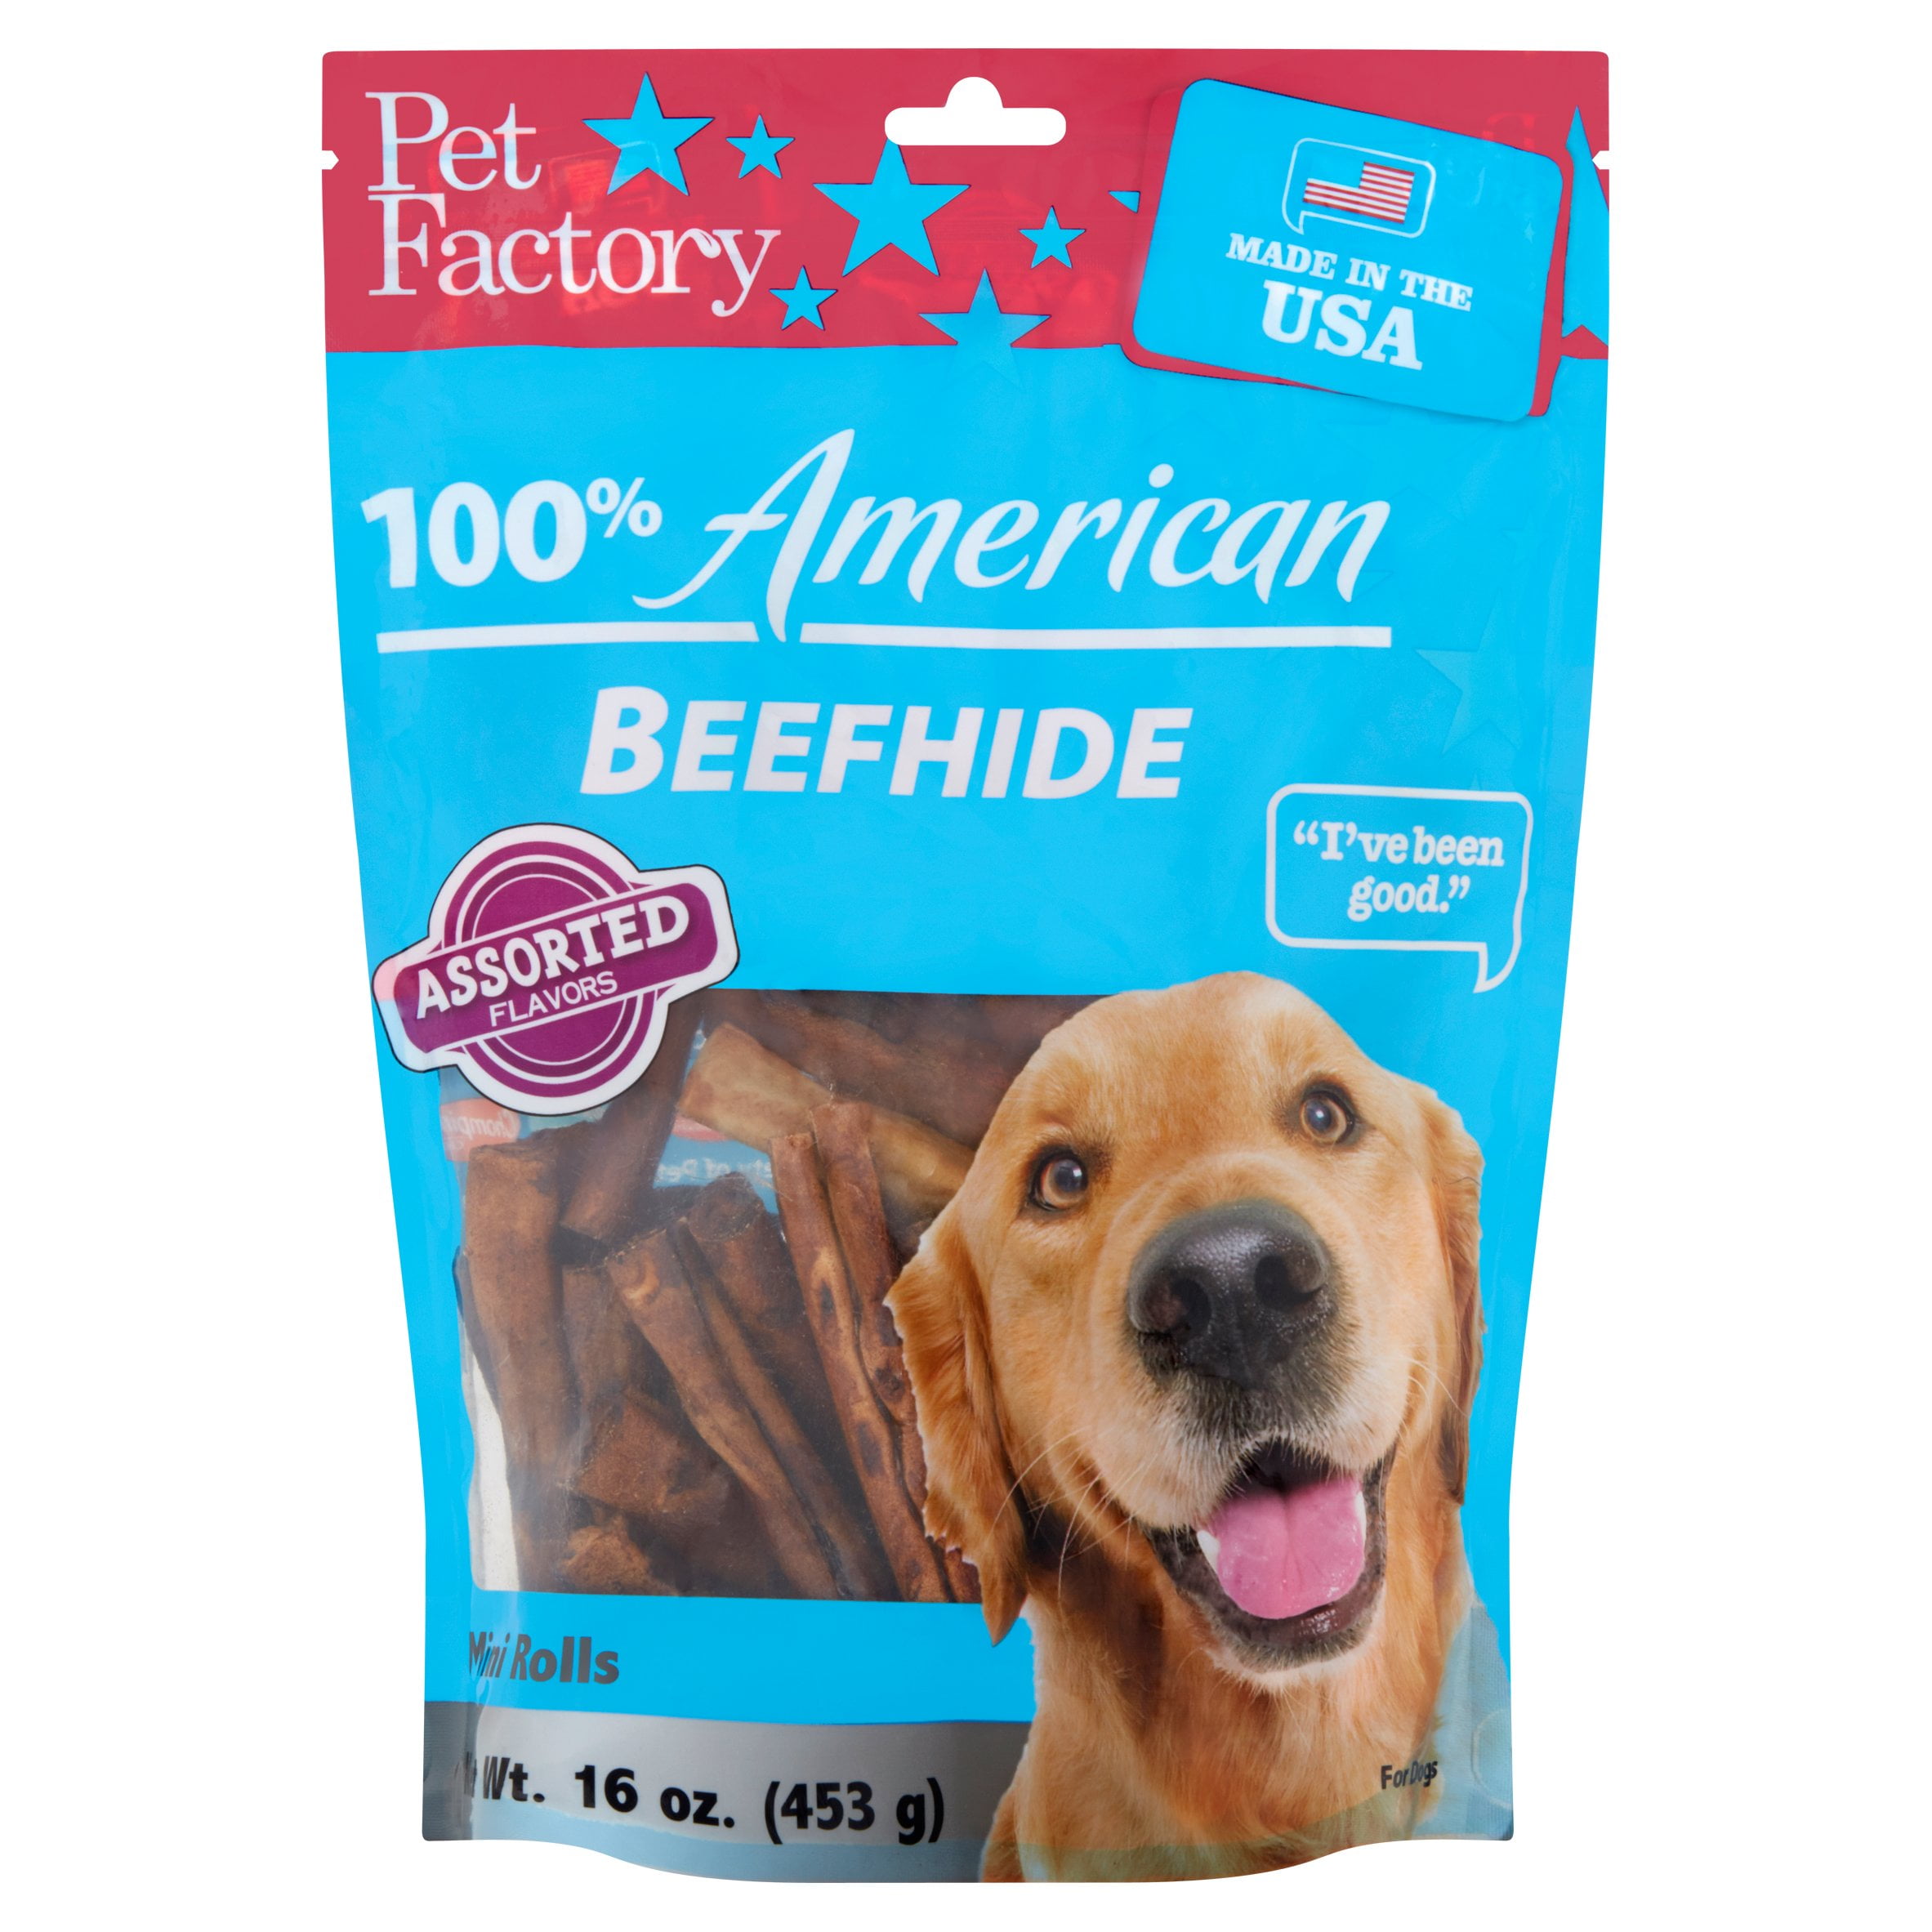 8 Pack Pet Factory American Beef Hide Rolls Chews For Dogs Medium/8-9 